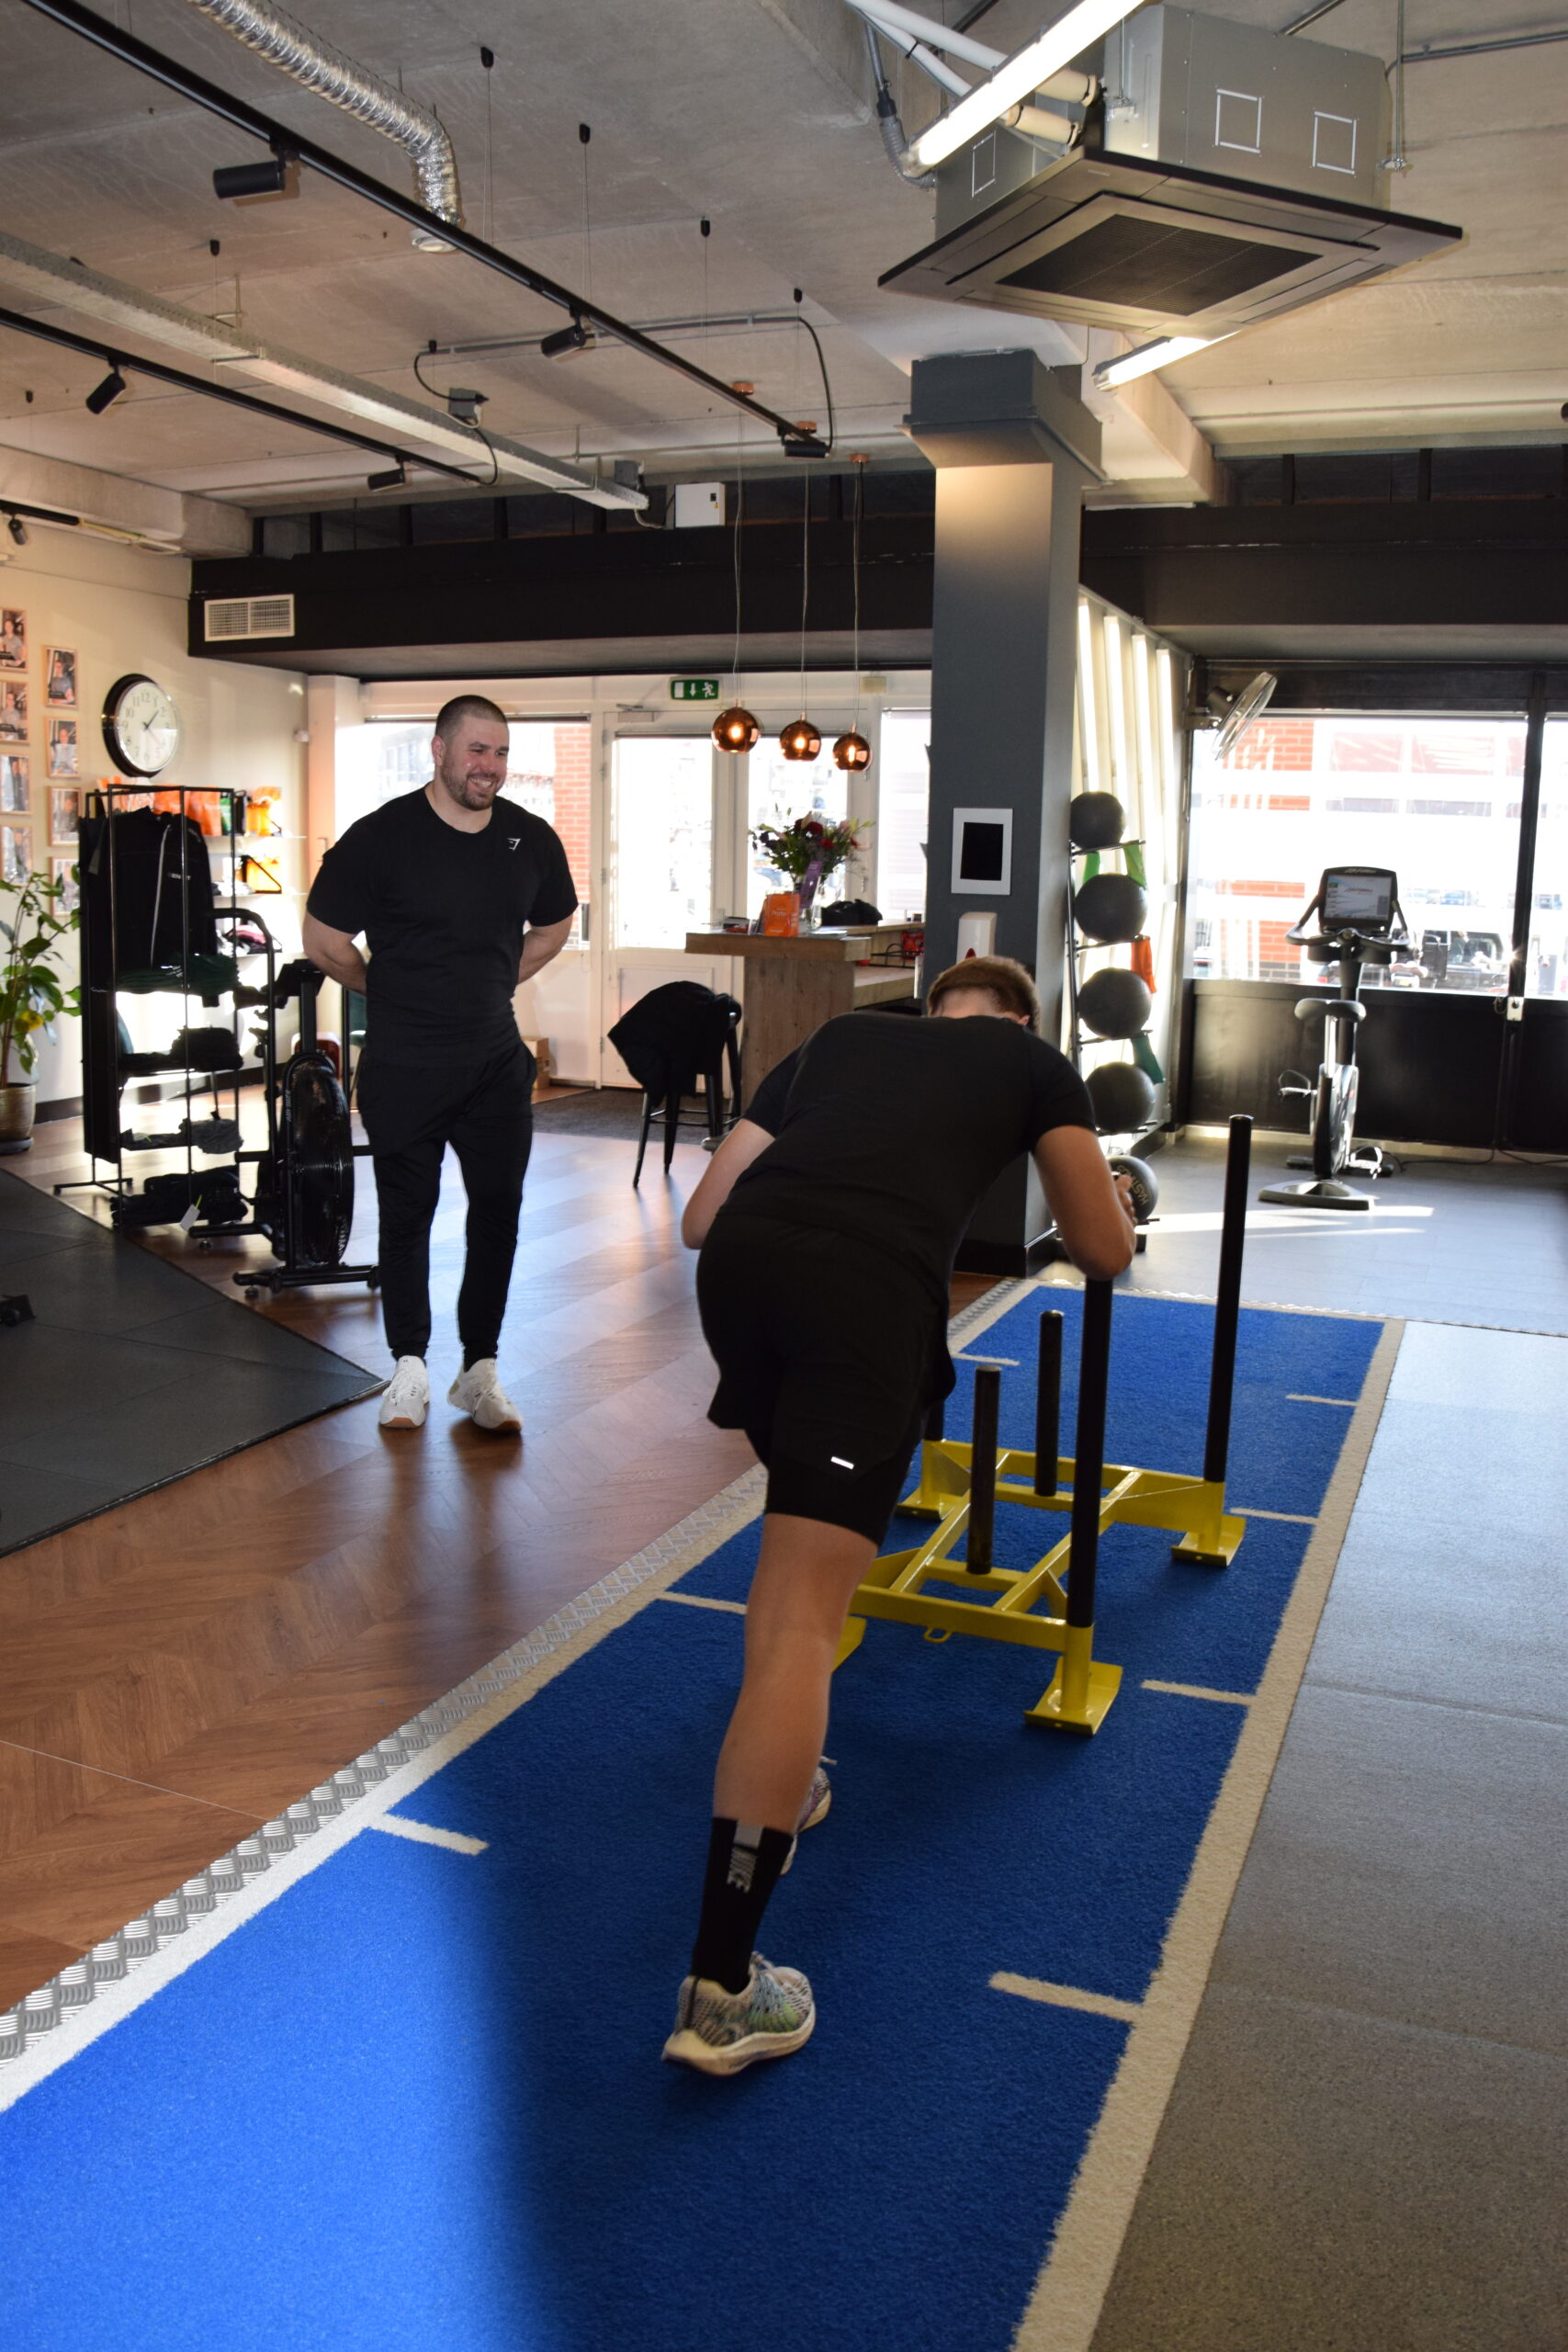 Personal trainer/coach coaching a client that is doing a sled push during a hiit work out.